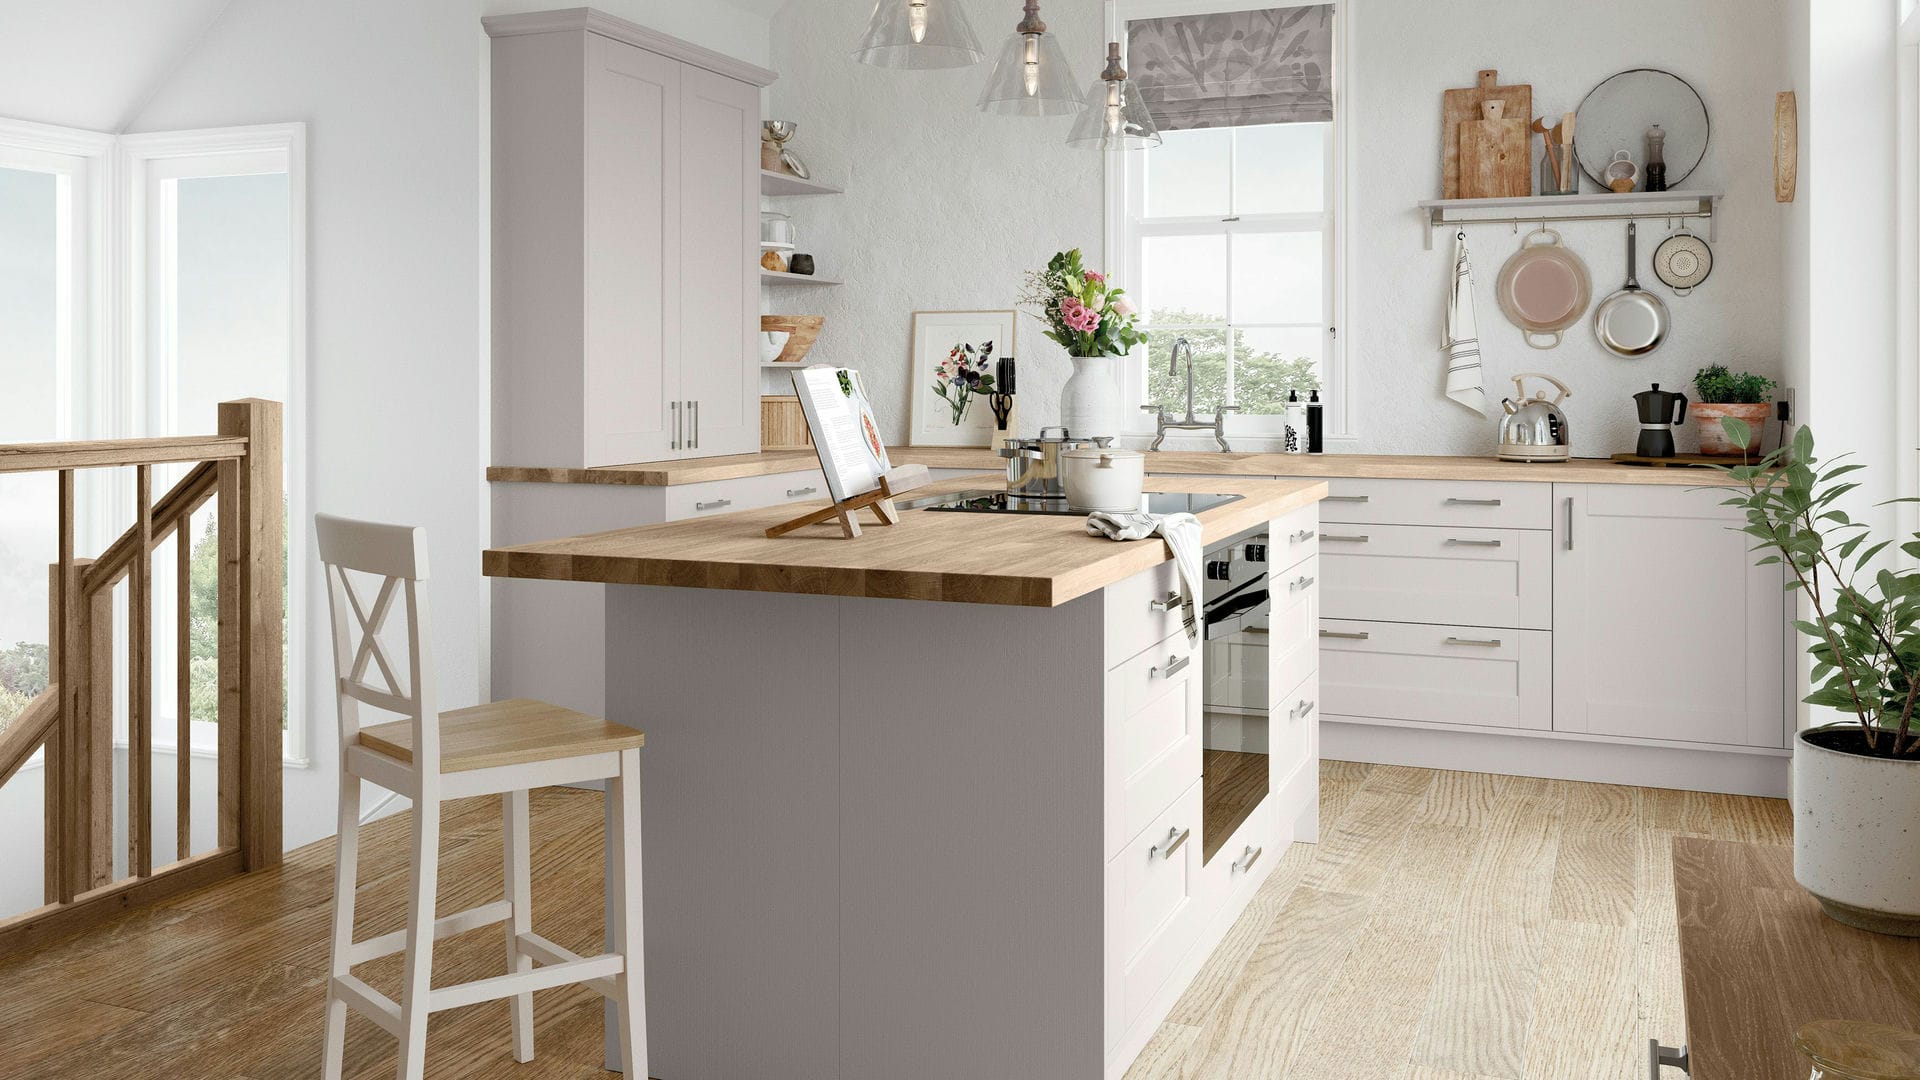 Modern Shaker Cashmere kitchen combining the timeless shaker design with a modern cashmere colourway